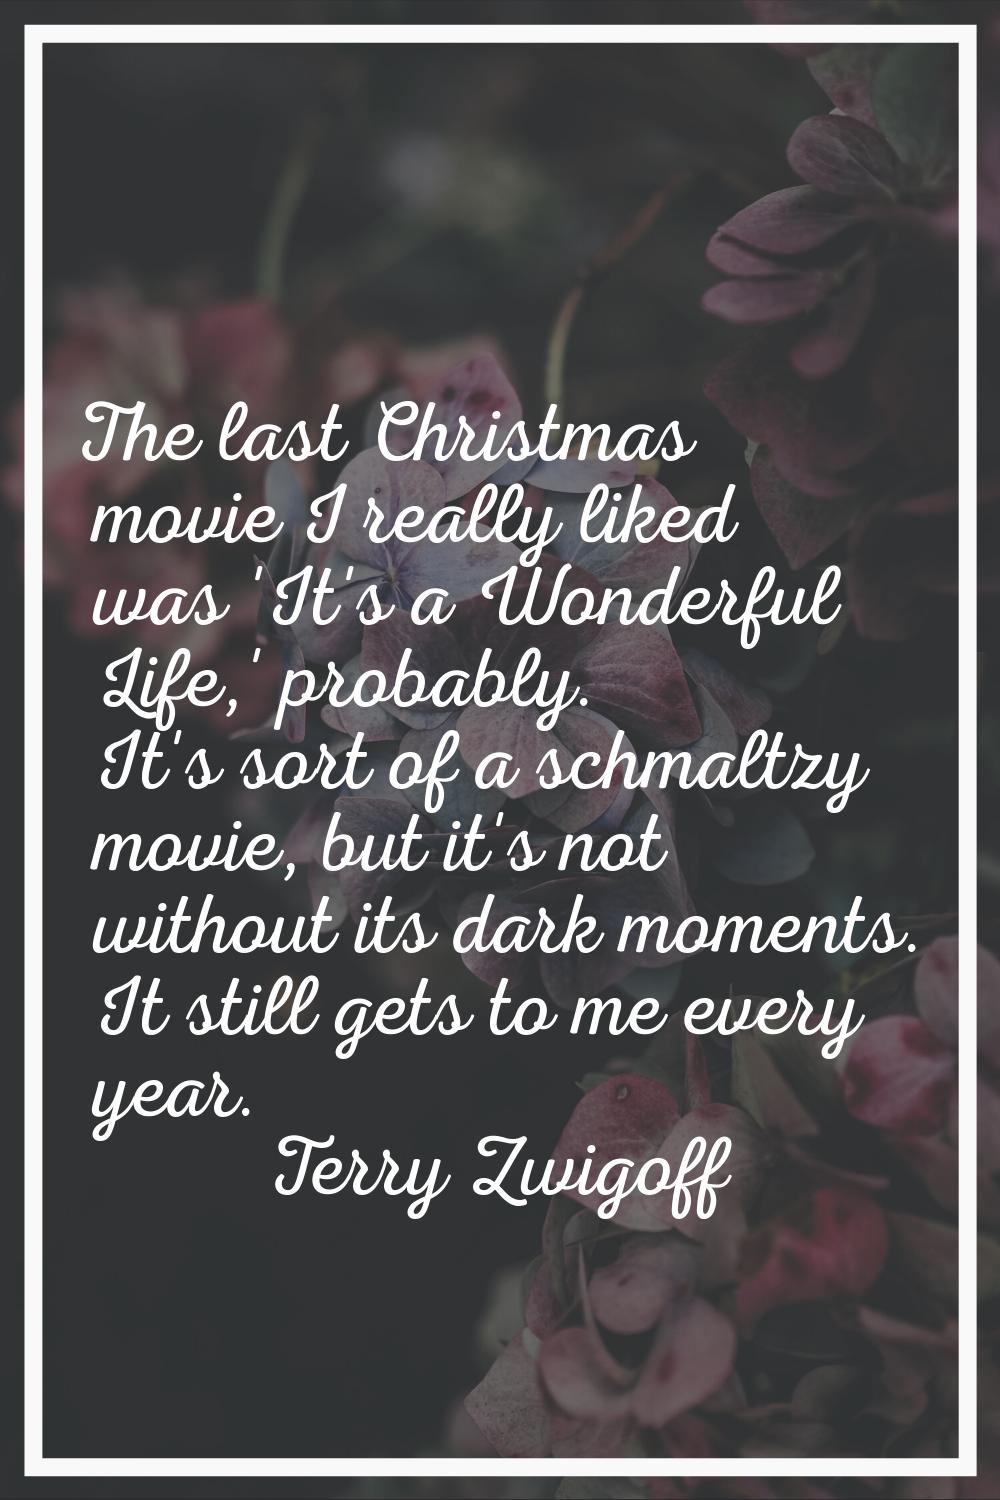 The last Christmas movie I really liked was 'It's a Wonderful Life,' probably. It's sort of a schma